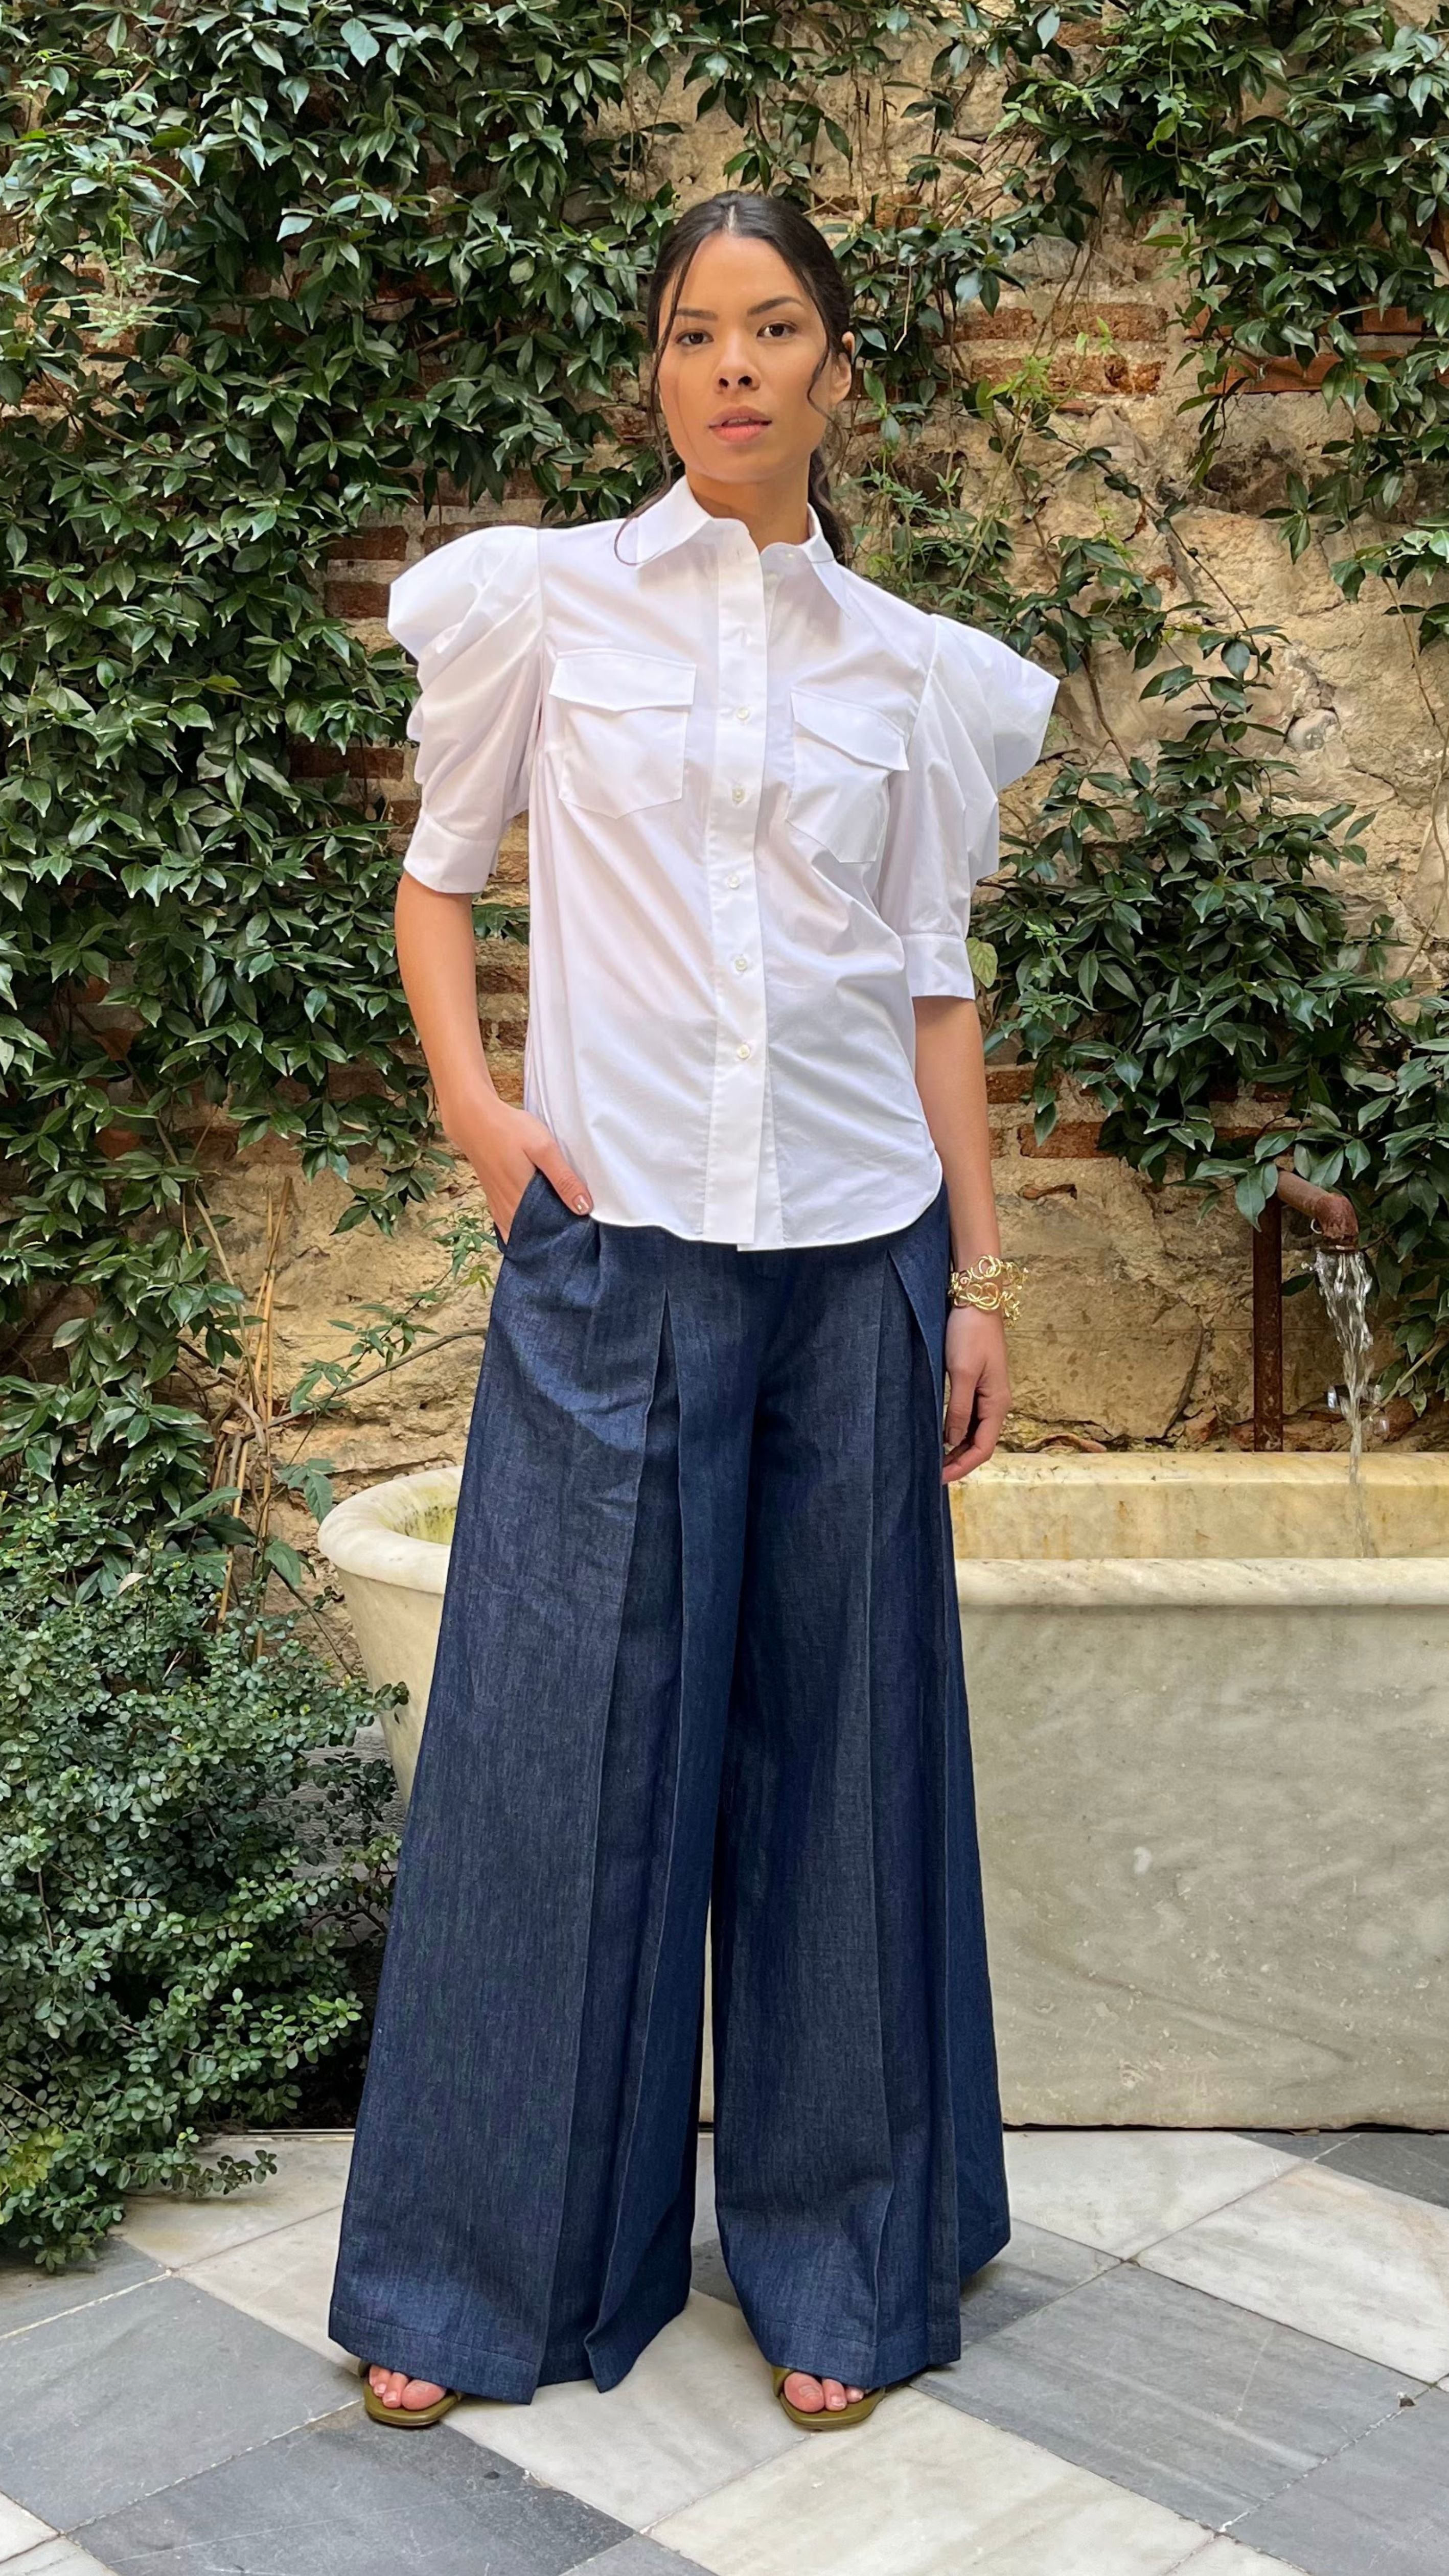 Rochas Paris Cotton Poplin Short Sleeved Shirt. A button up blouse in lightweight cotton it has two front pockets and puffed sleeves. Photo shown on model also wearing Rochas wide leg denim trousers.